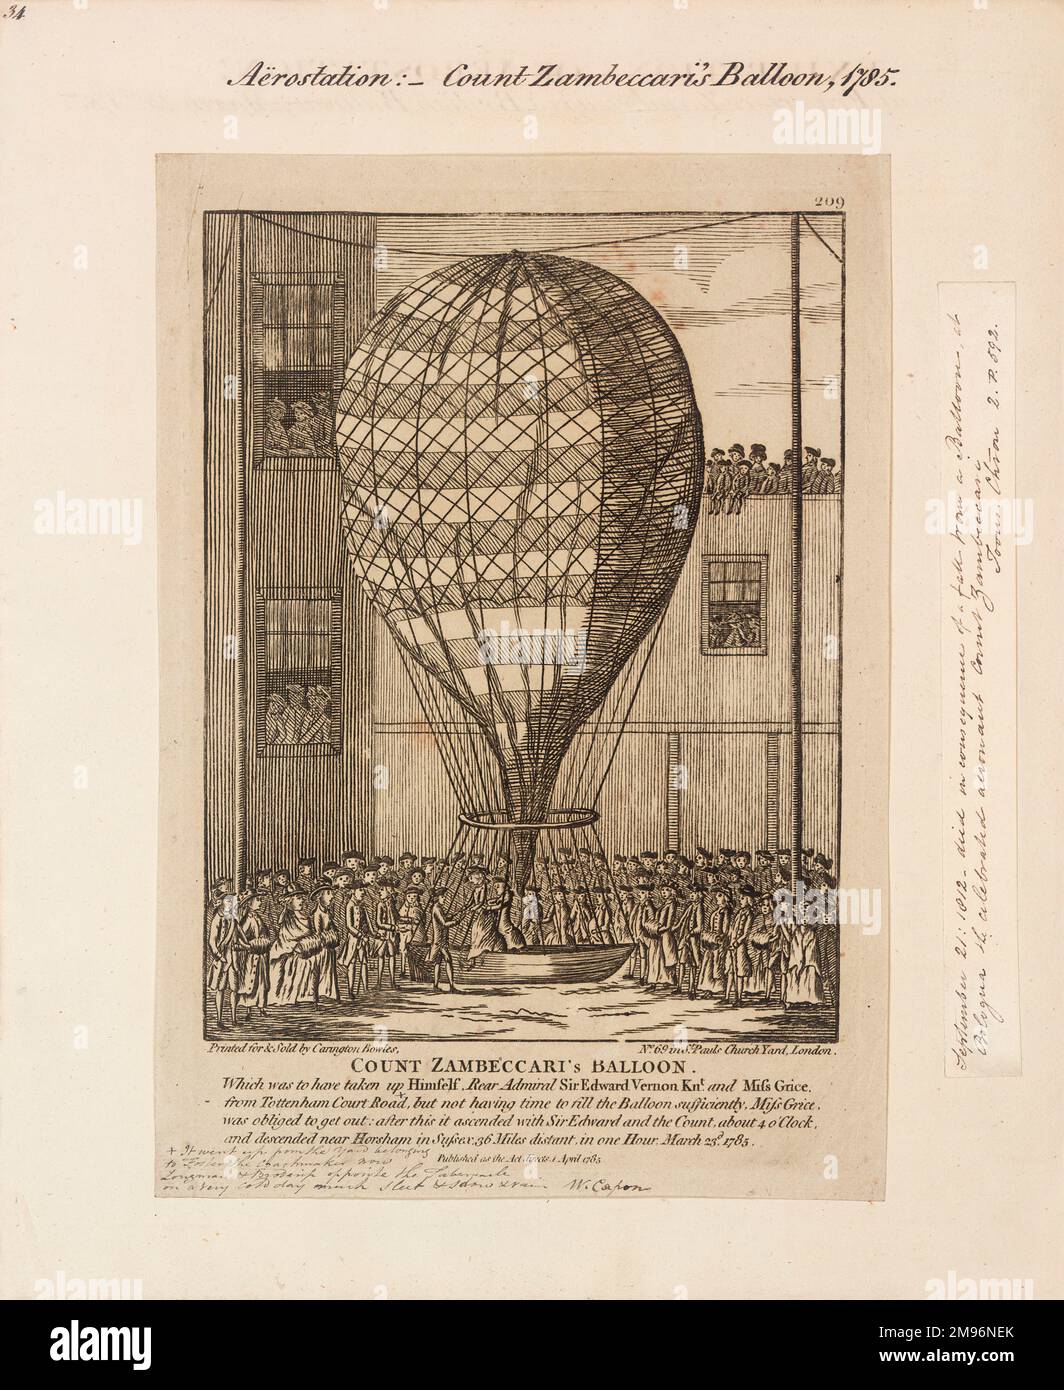 Count Zambeccari's balloon Showing Miss Grice having to dismount so that the payload will be light enough to enable the flight from Tottenham Court Road. The reduced crew consisted of Count Zambeccari and Rear Admiral Sir Edward Vernon. They descended near Horsham, Sussex, 36 miles away. Stock Photo